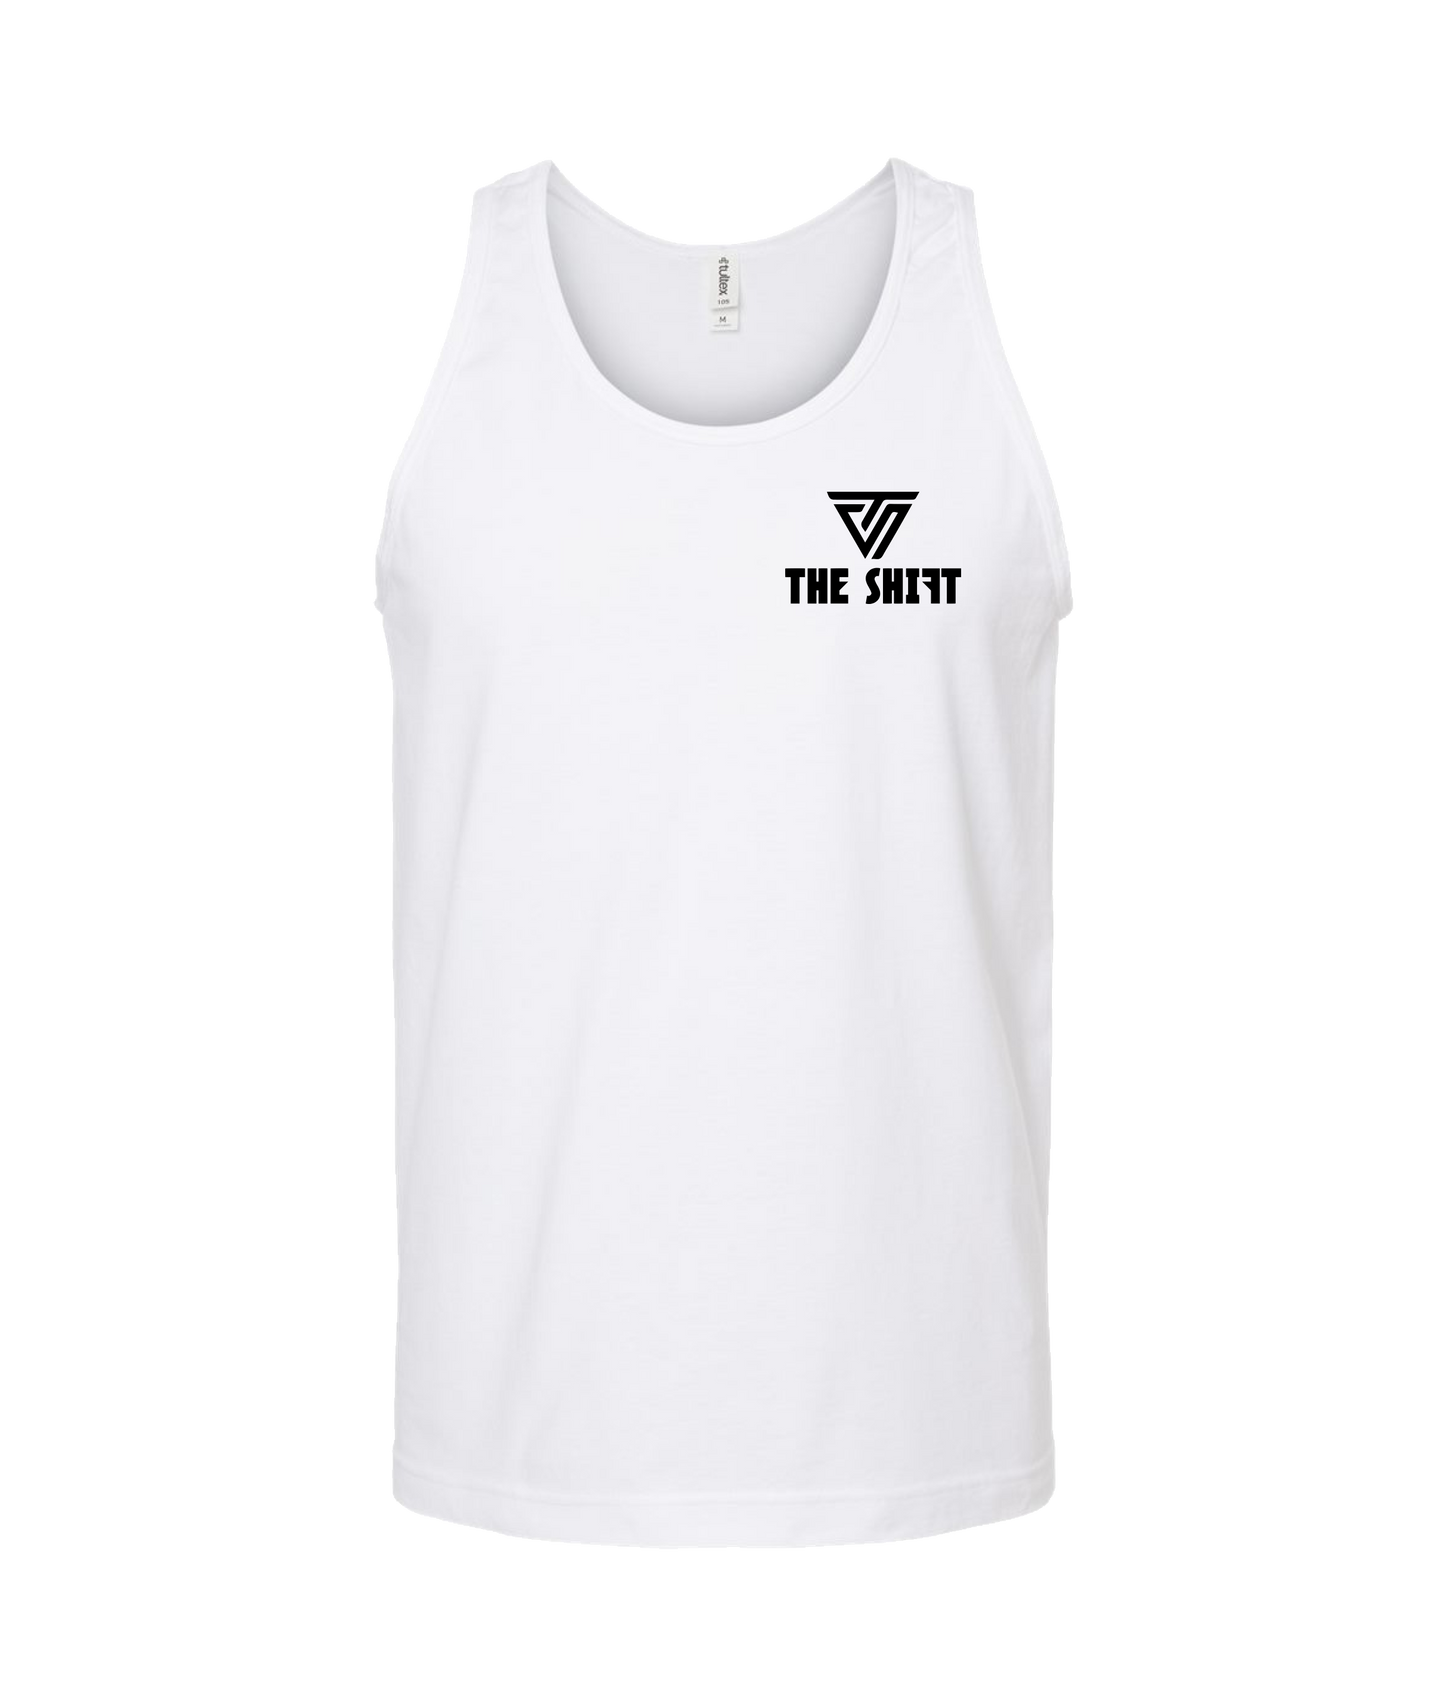 TheShift - Be The Shift - White Tank Top